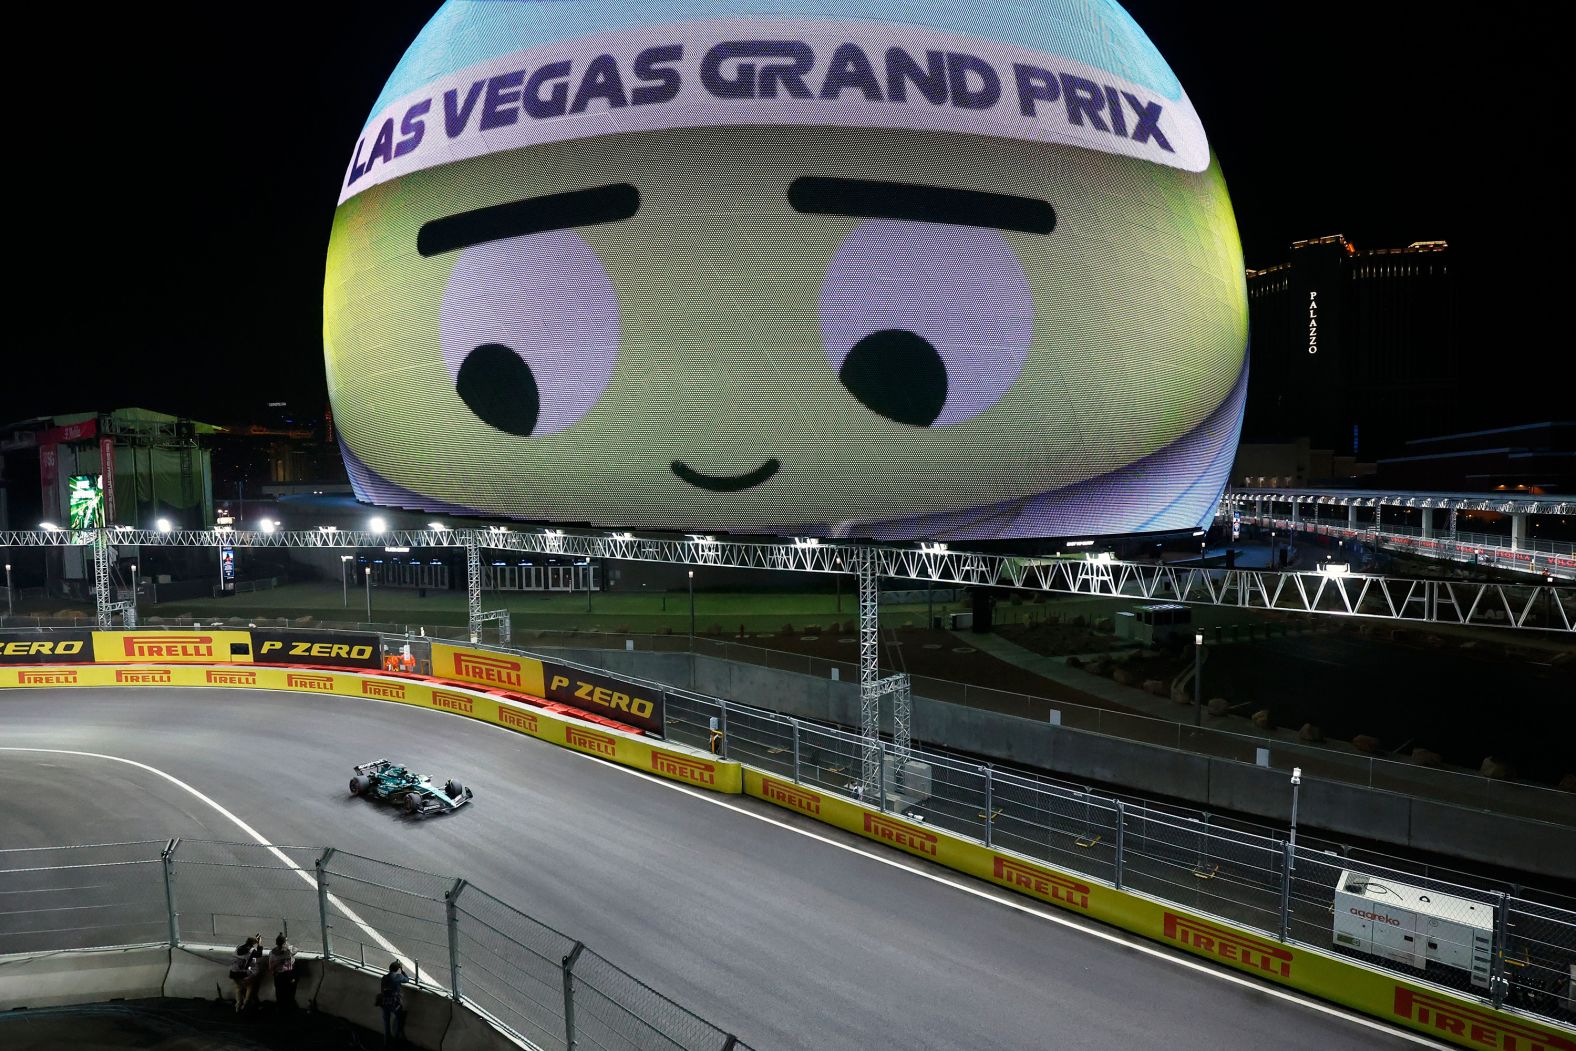 Lance Stroll drives by the Sphere in Las Vegas during a Formula One practice session in 2023. The new race took drivers through the Las Vegas Strip and other streets in the city.